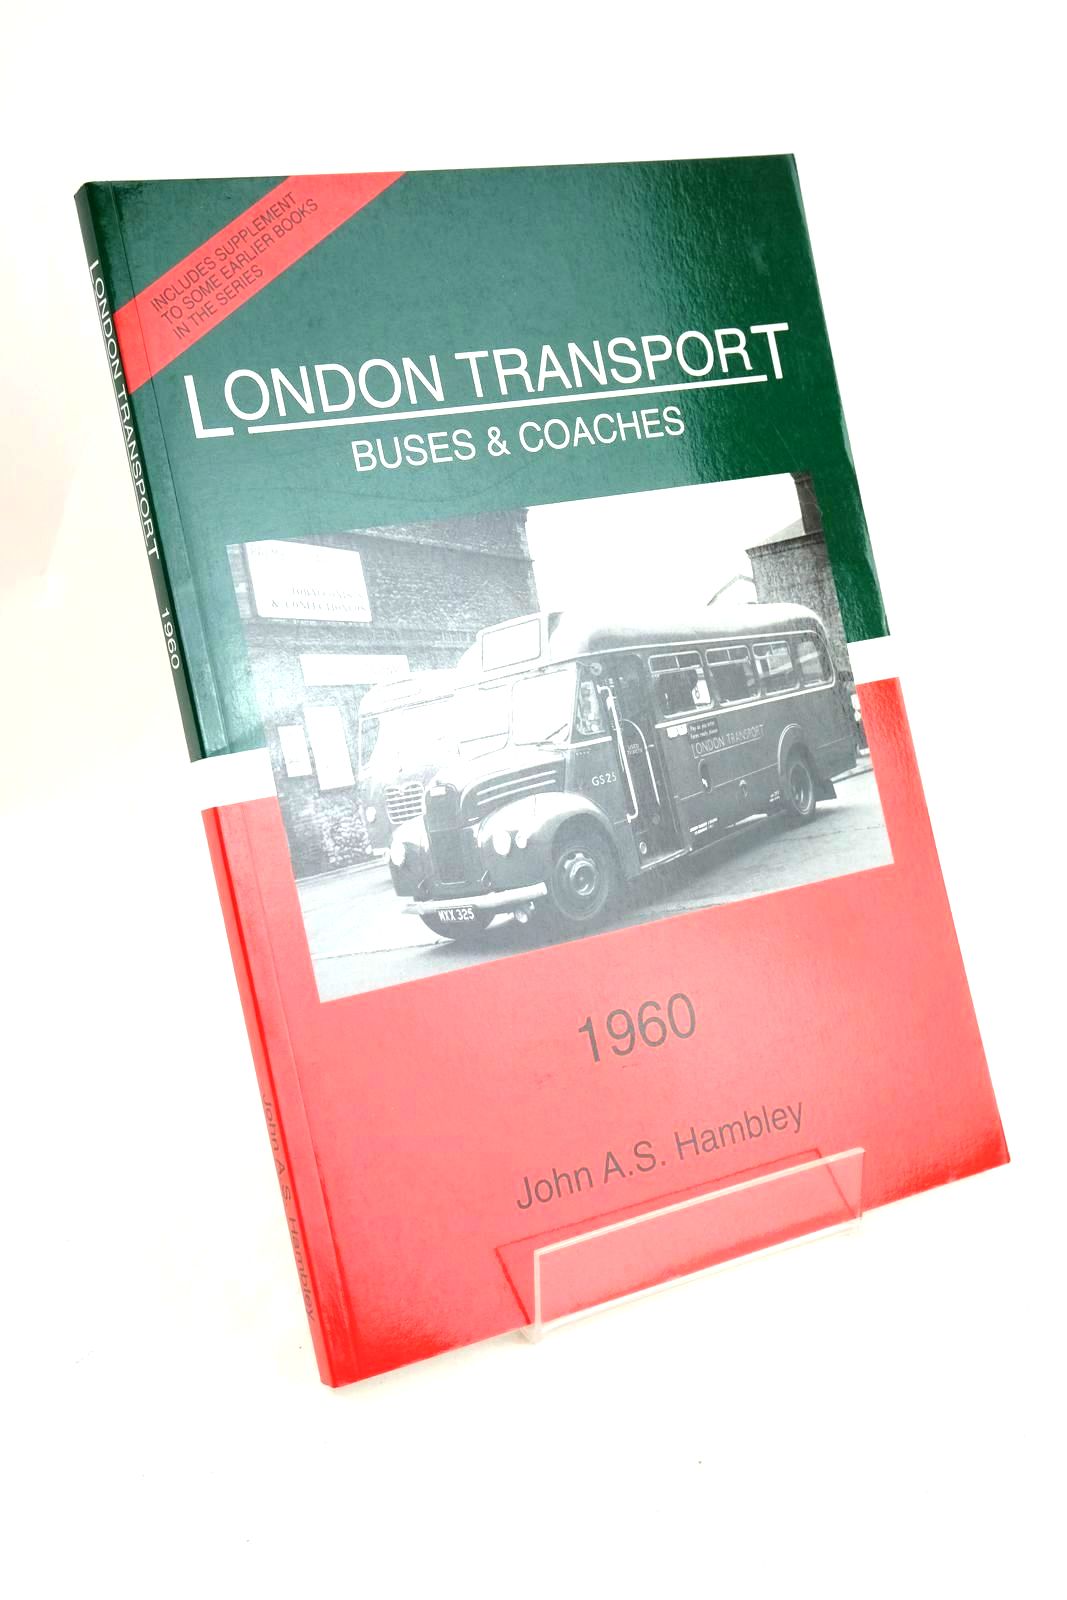 Photo of LONDON TRANSPORT BUSES & COACHES 1960 written by Hambley, John A.S. Ruddom, David published by John A.S. Hambley (STOCK CODE: 1327382)  for sale by Stella & Rose's Books